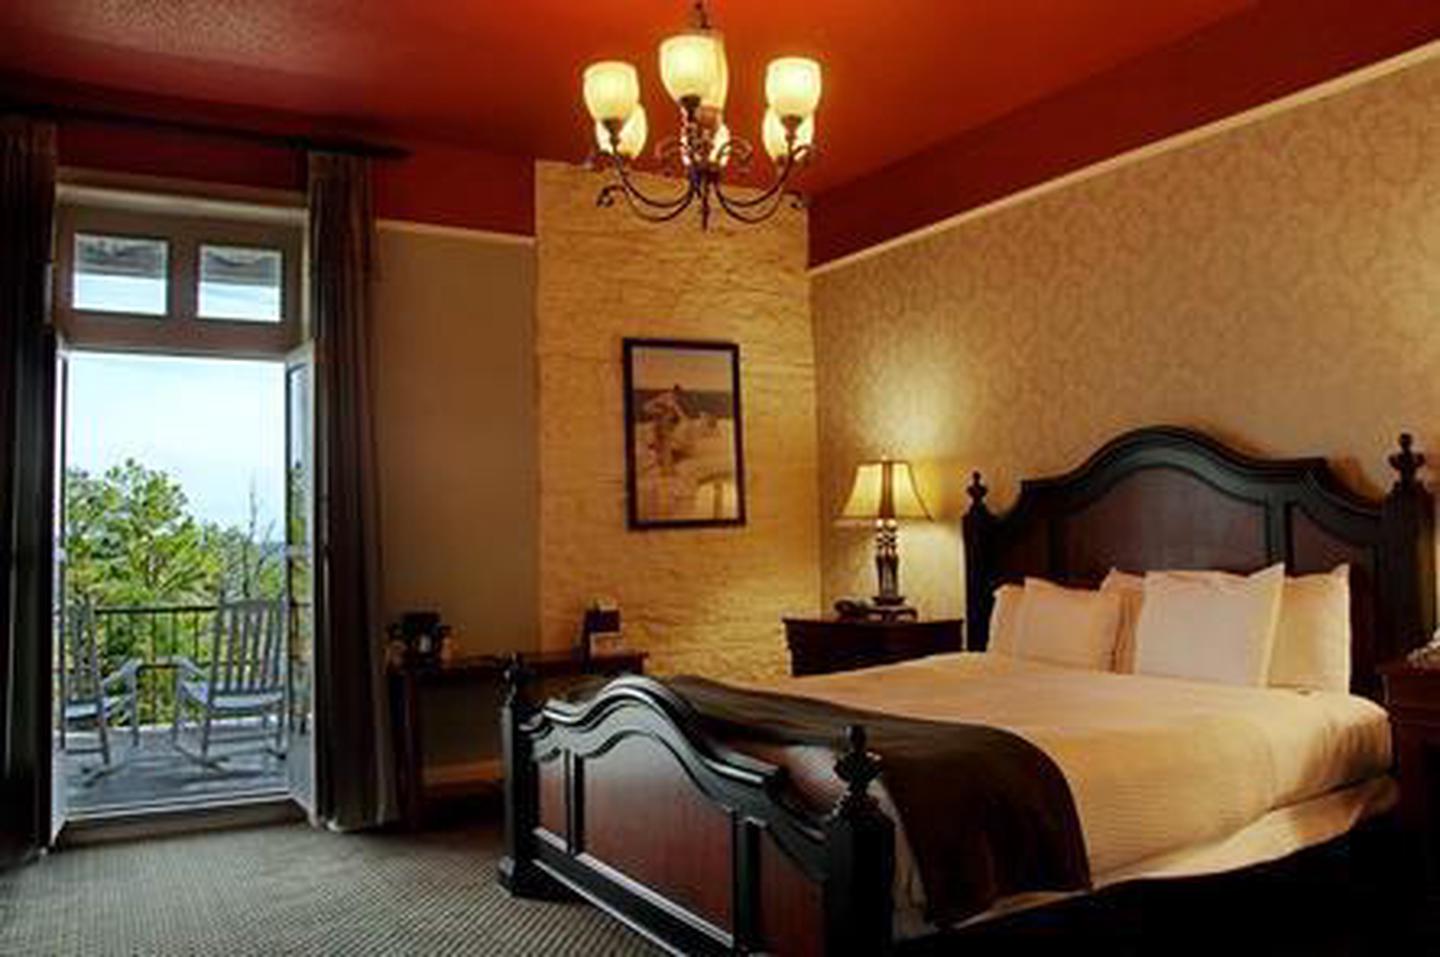 GuestroomEach of the 72 guestrooms offer friendly accommodations with Victorian style.  Guests can choose between Jacuzzi Suites, Penthouses, Parlor Suites and more.